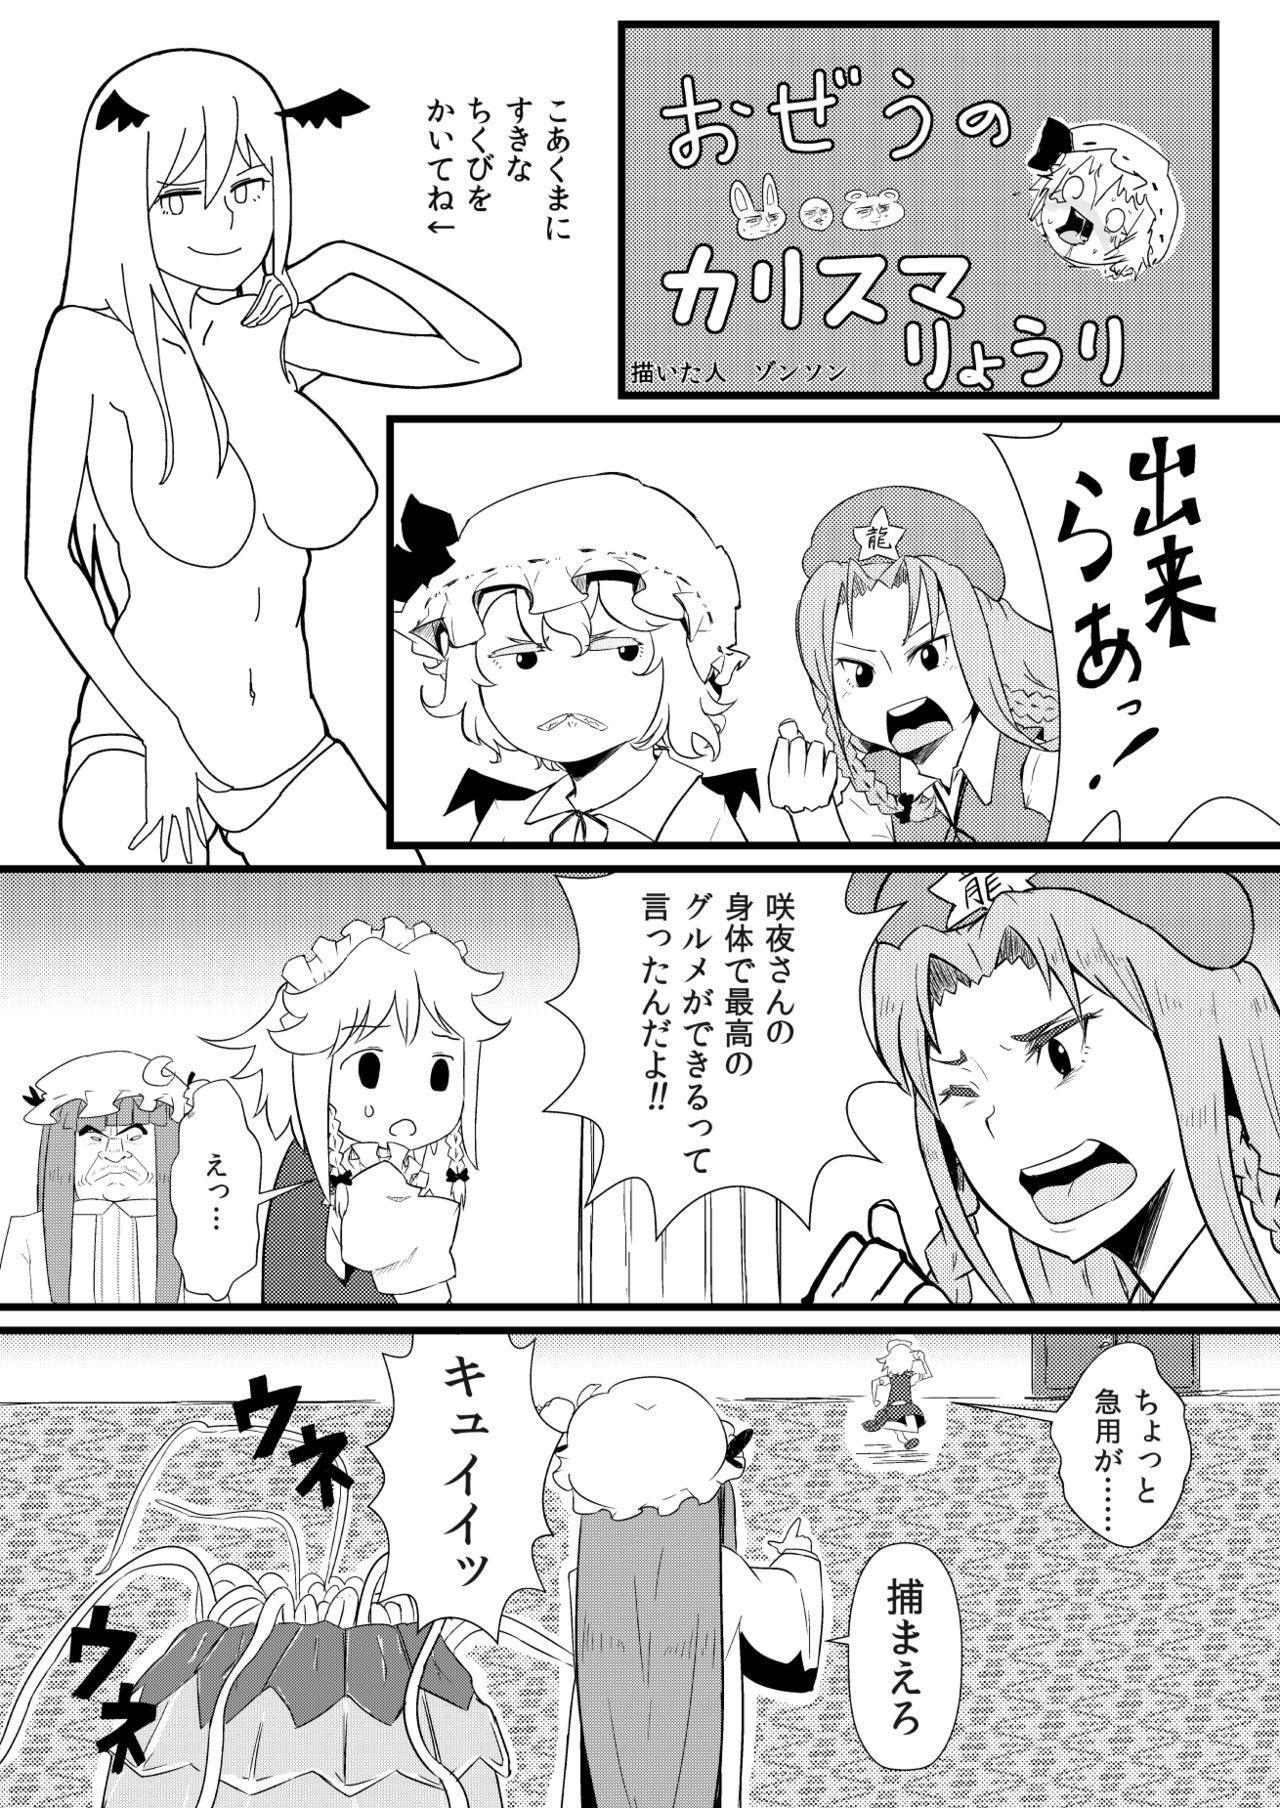 Cumload 東方板としあき合同誌5 - Touhou project Cunt - Page 5